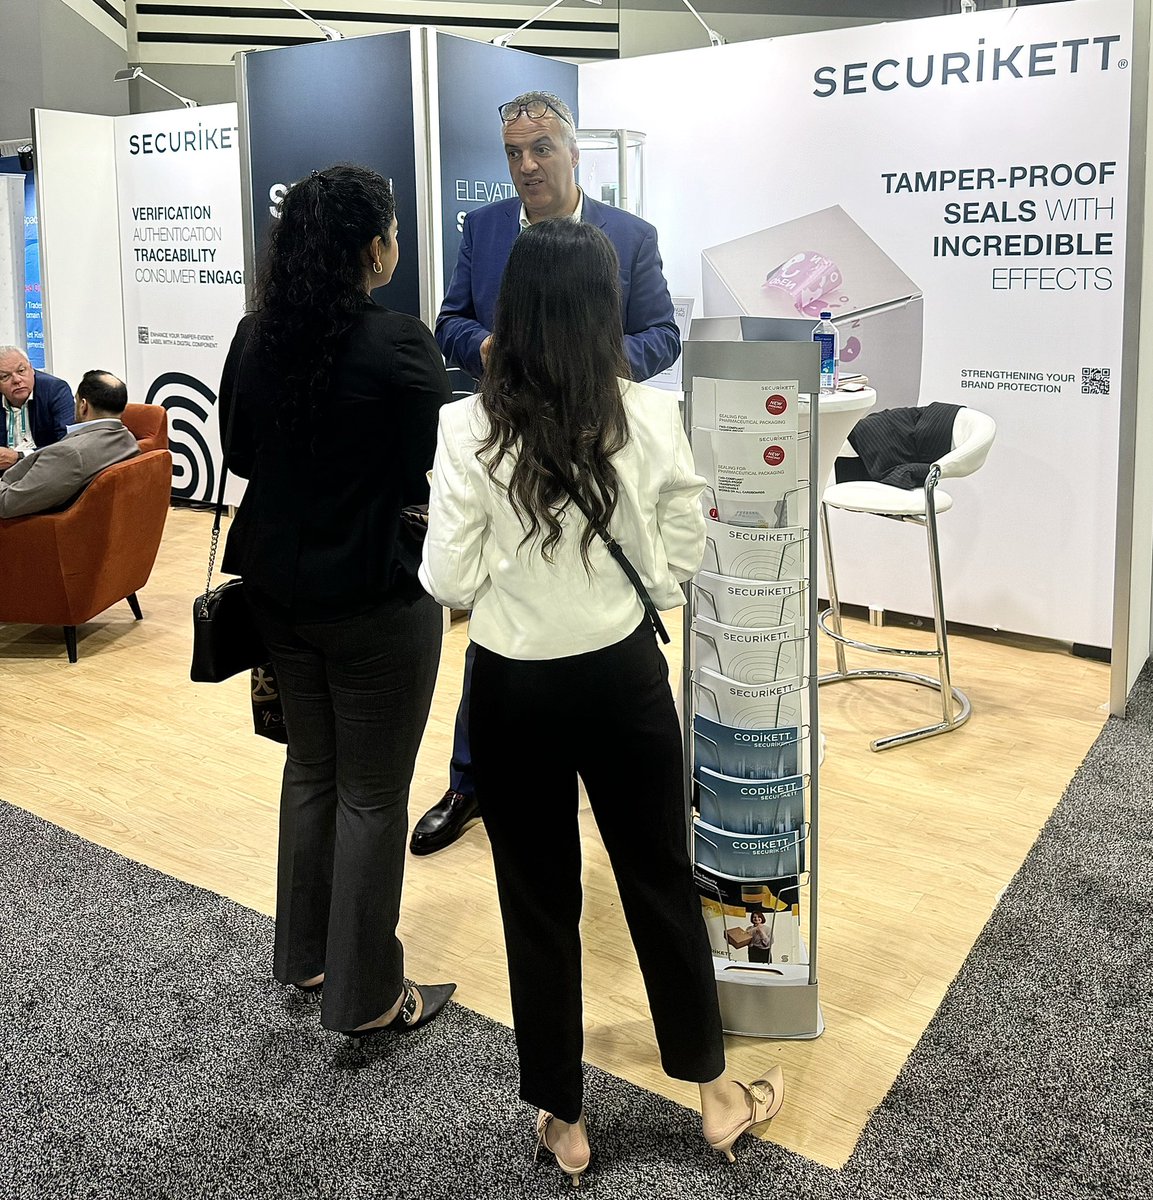 All smiles from Atlanta! :) 
Day 1 of the 2024 INTA Annual Meeting has officially begun! Stop by booth 755 and chat with one of Securikett’s security label experts!
#INTA2024 #Securitylabels #brandprotection #sustainablepackaging